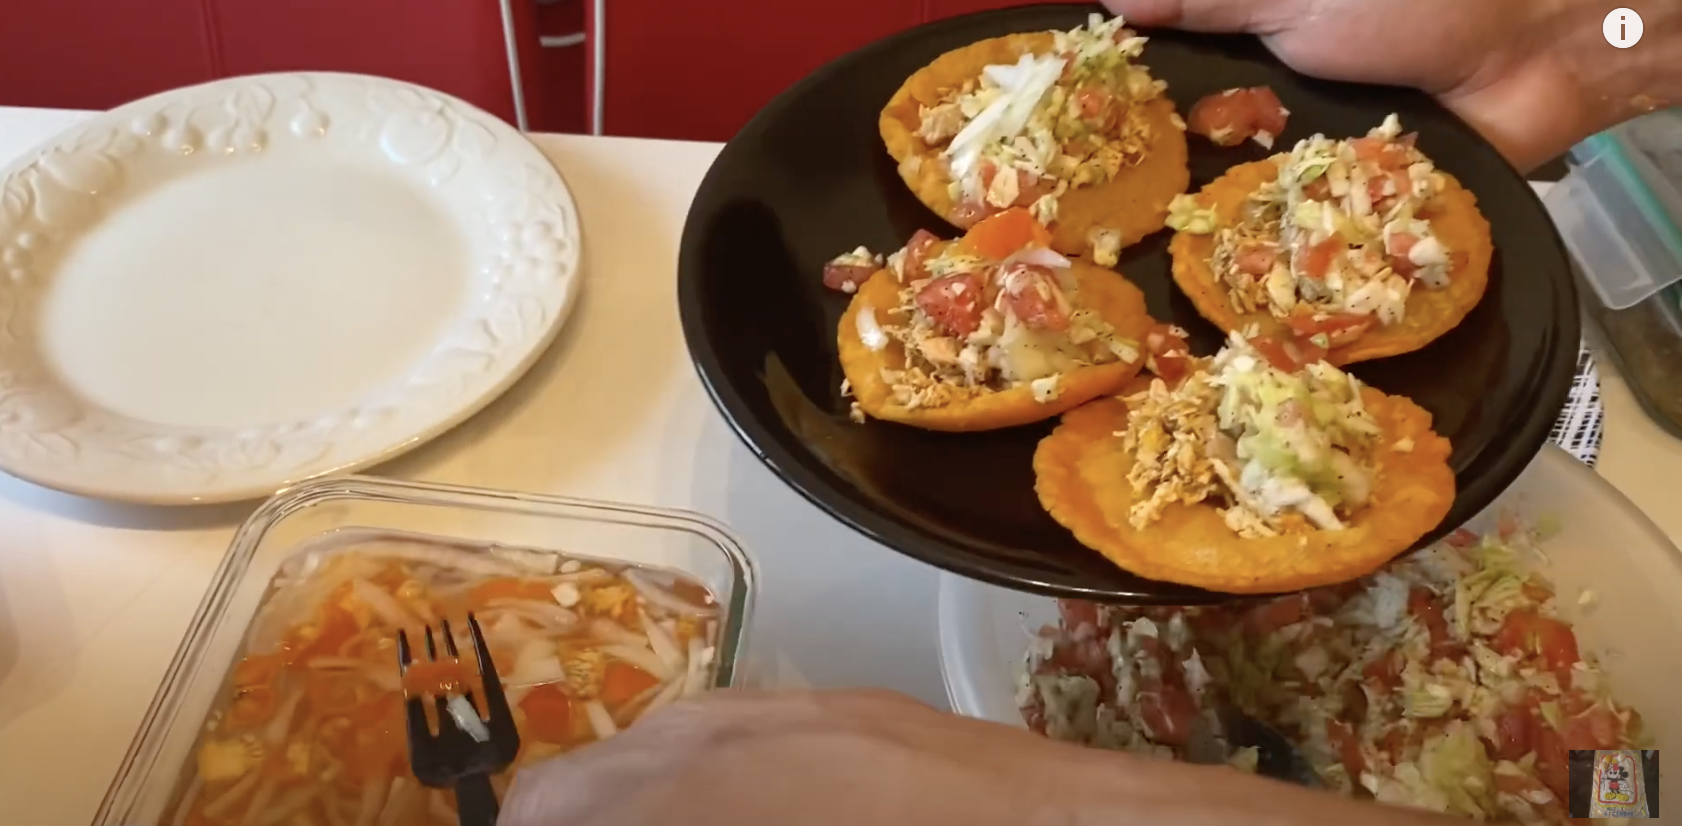 A person holds salbutes on a plate